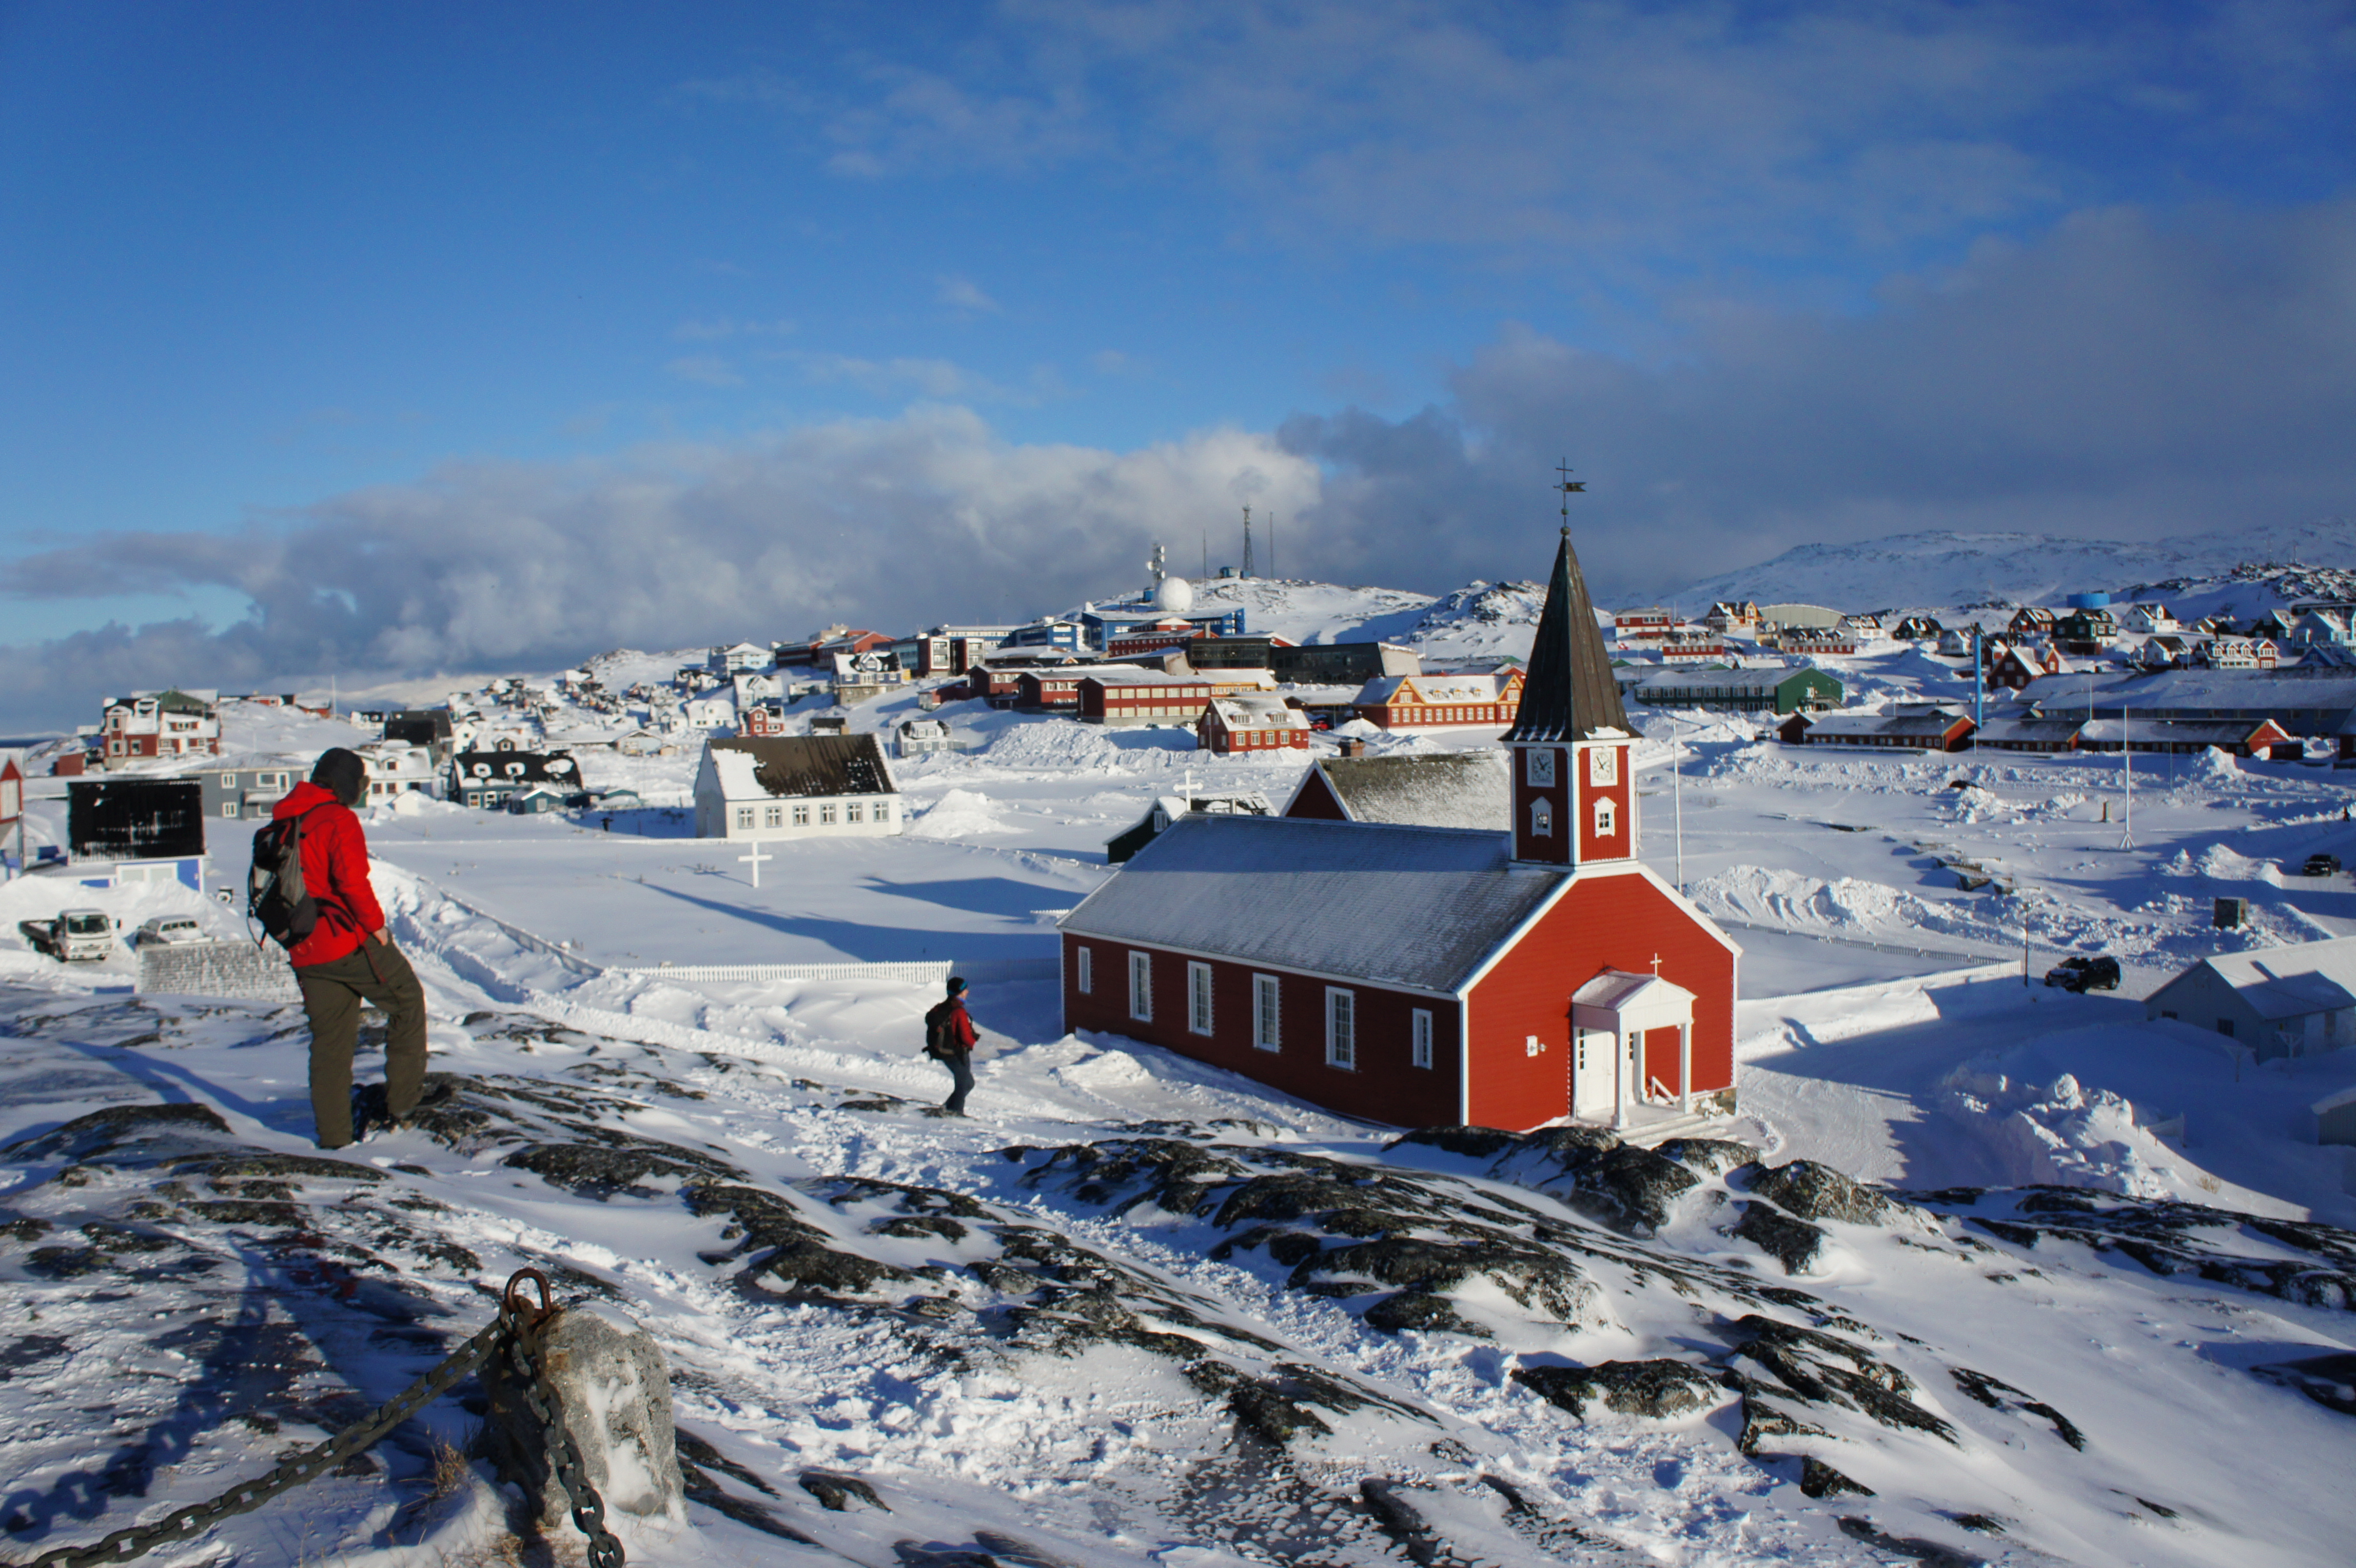 Overlooking Nuuk Old Town from the statue of Nuuk’s founder, Lutheran missionary Hans Egede (not visible, behind photographer). The red Nuuk Cathedral is visible in the mid-ground. Photo credit: Jill Rajewicz